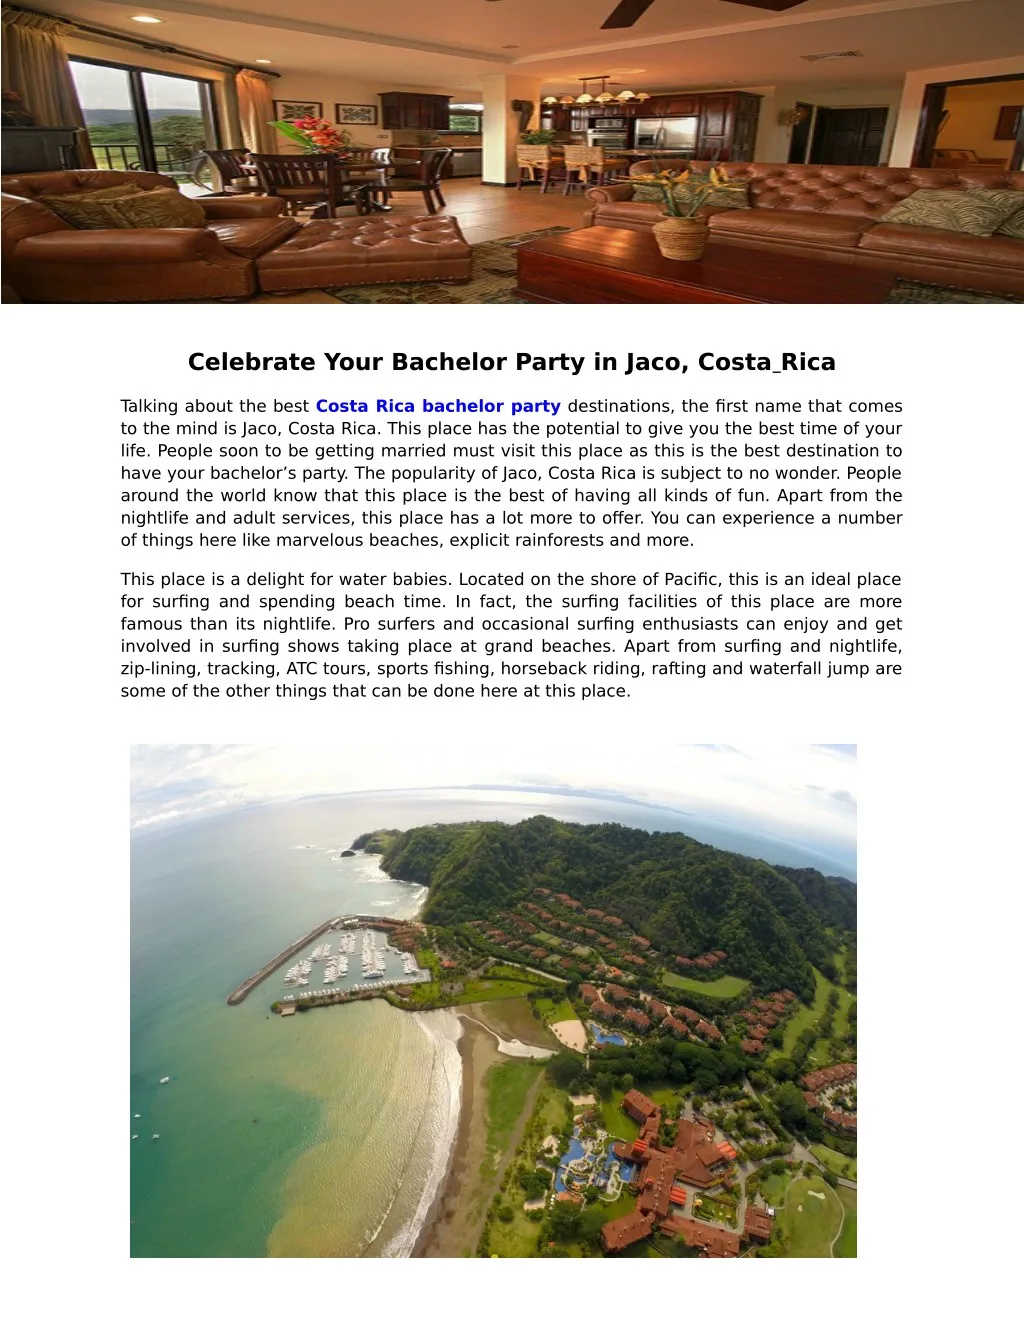 celebrate your bachelor party in jaco costa rica